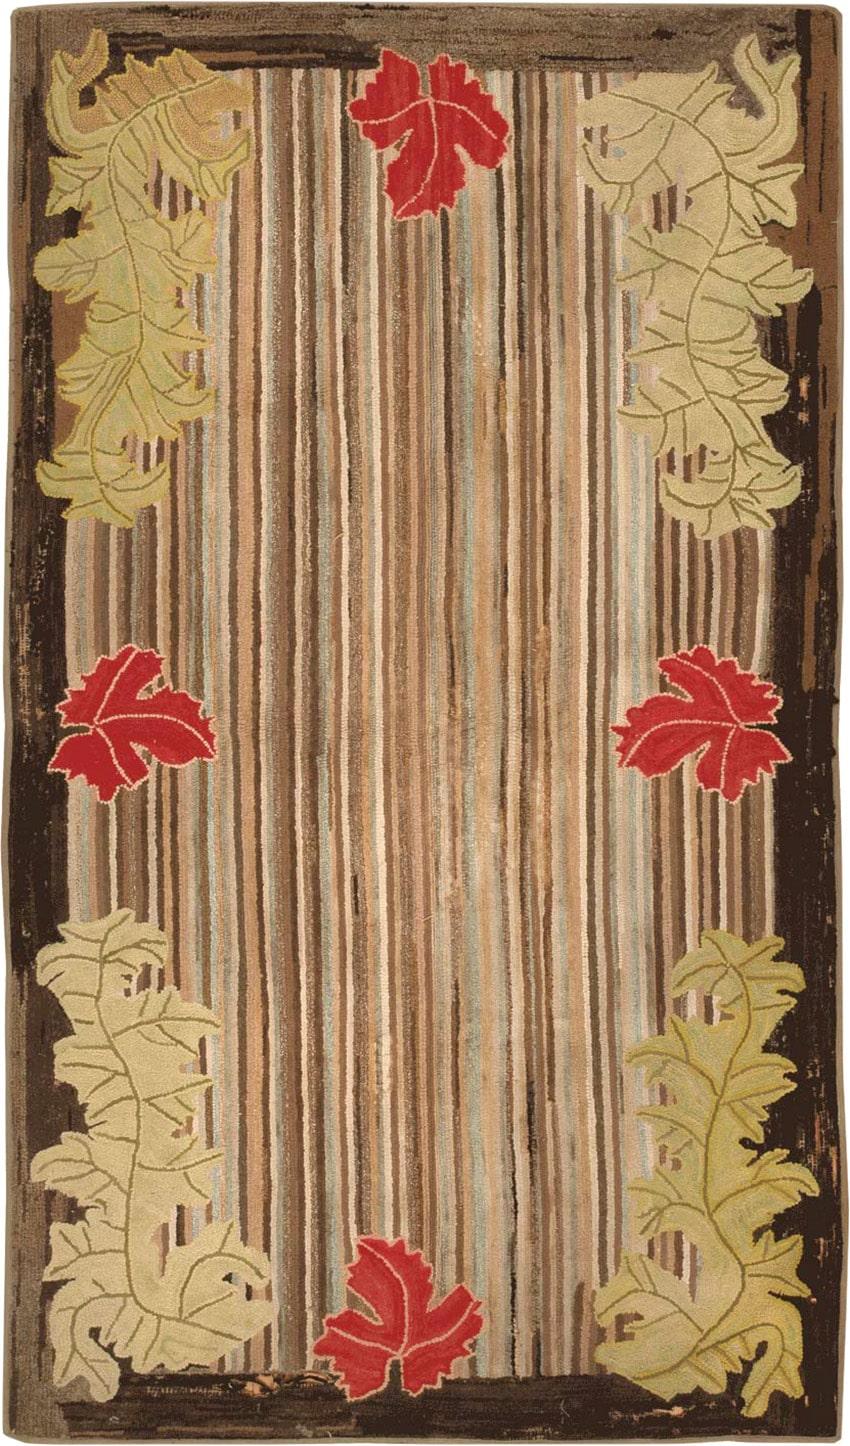 Hooked Rug, America, Early 20th Century – Size: 4 ft 5 in x 7 ft 9 in (1.35 m x 2.36 m)

